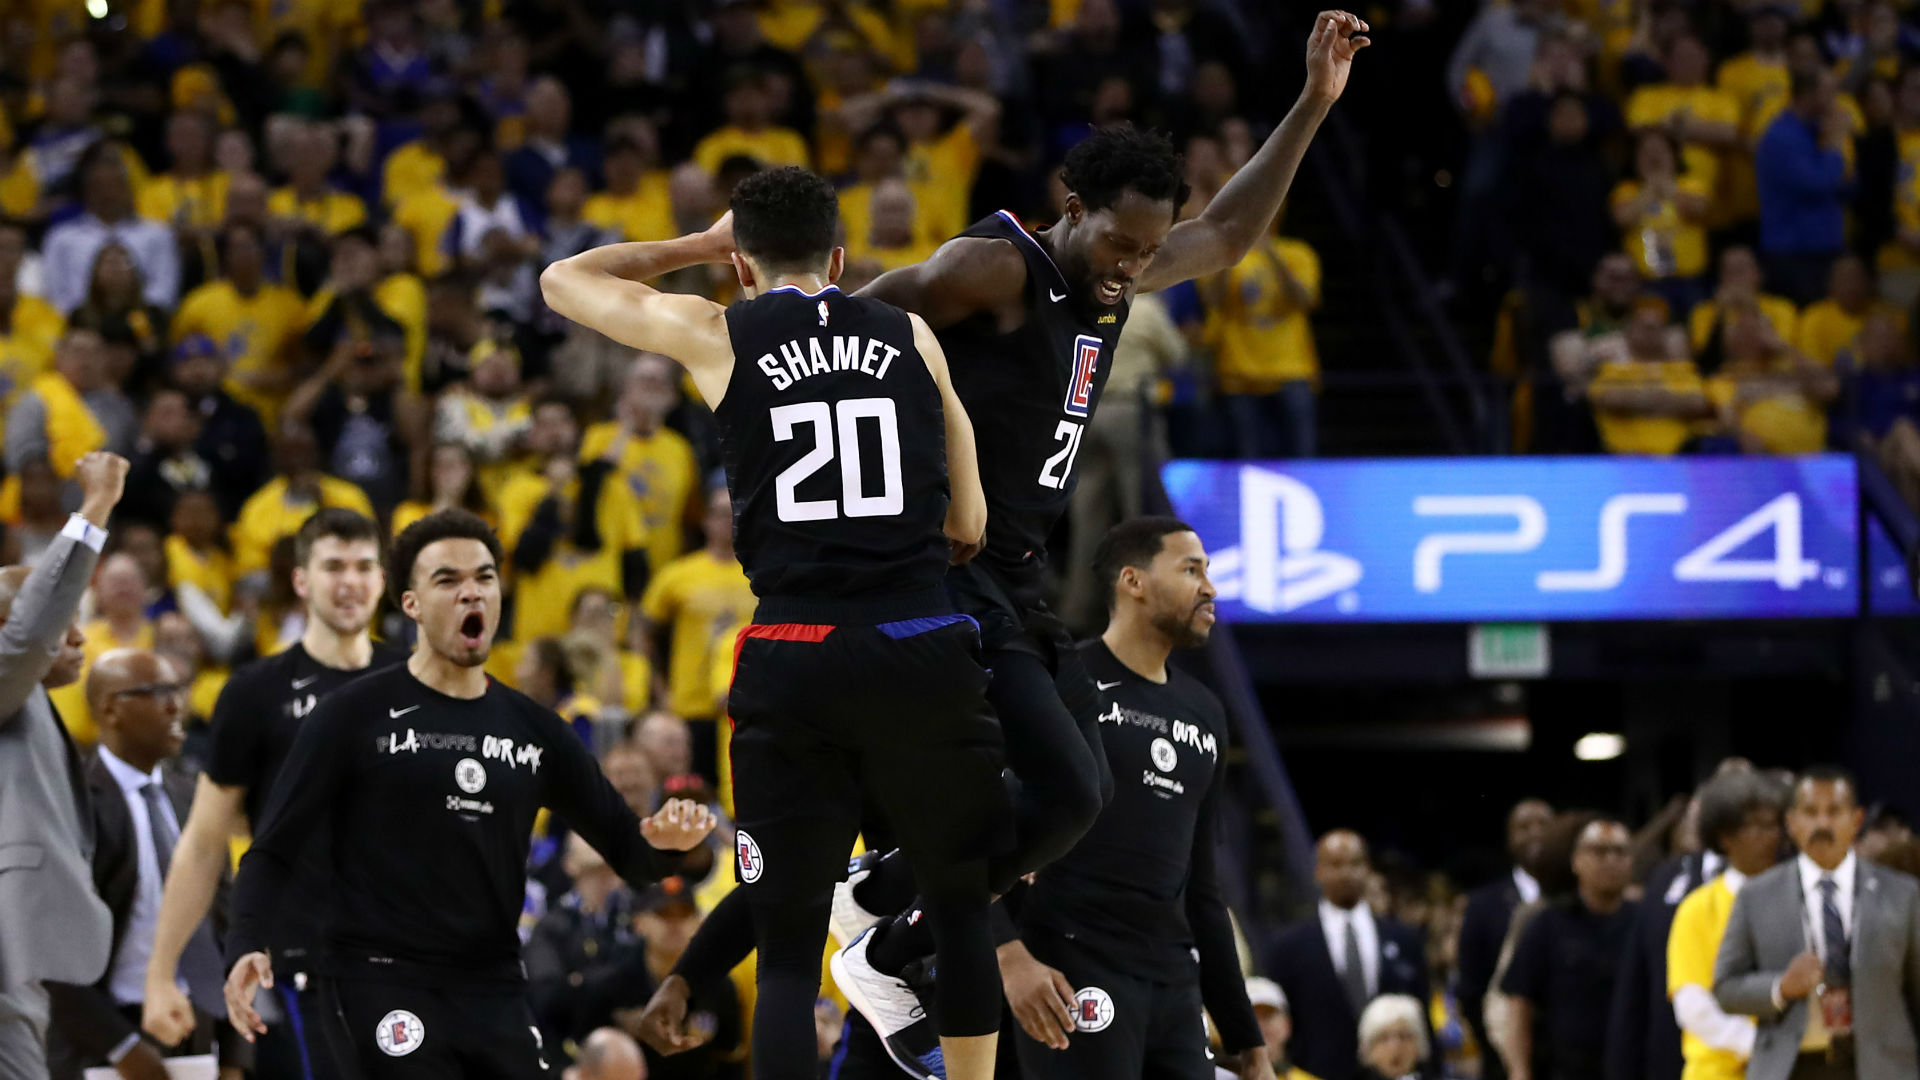 NBA Playoffs 2019: Scores and highlights from Nets vs. Sixers, Clippers vs. Warriors ...1920 x 1080